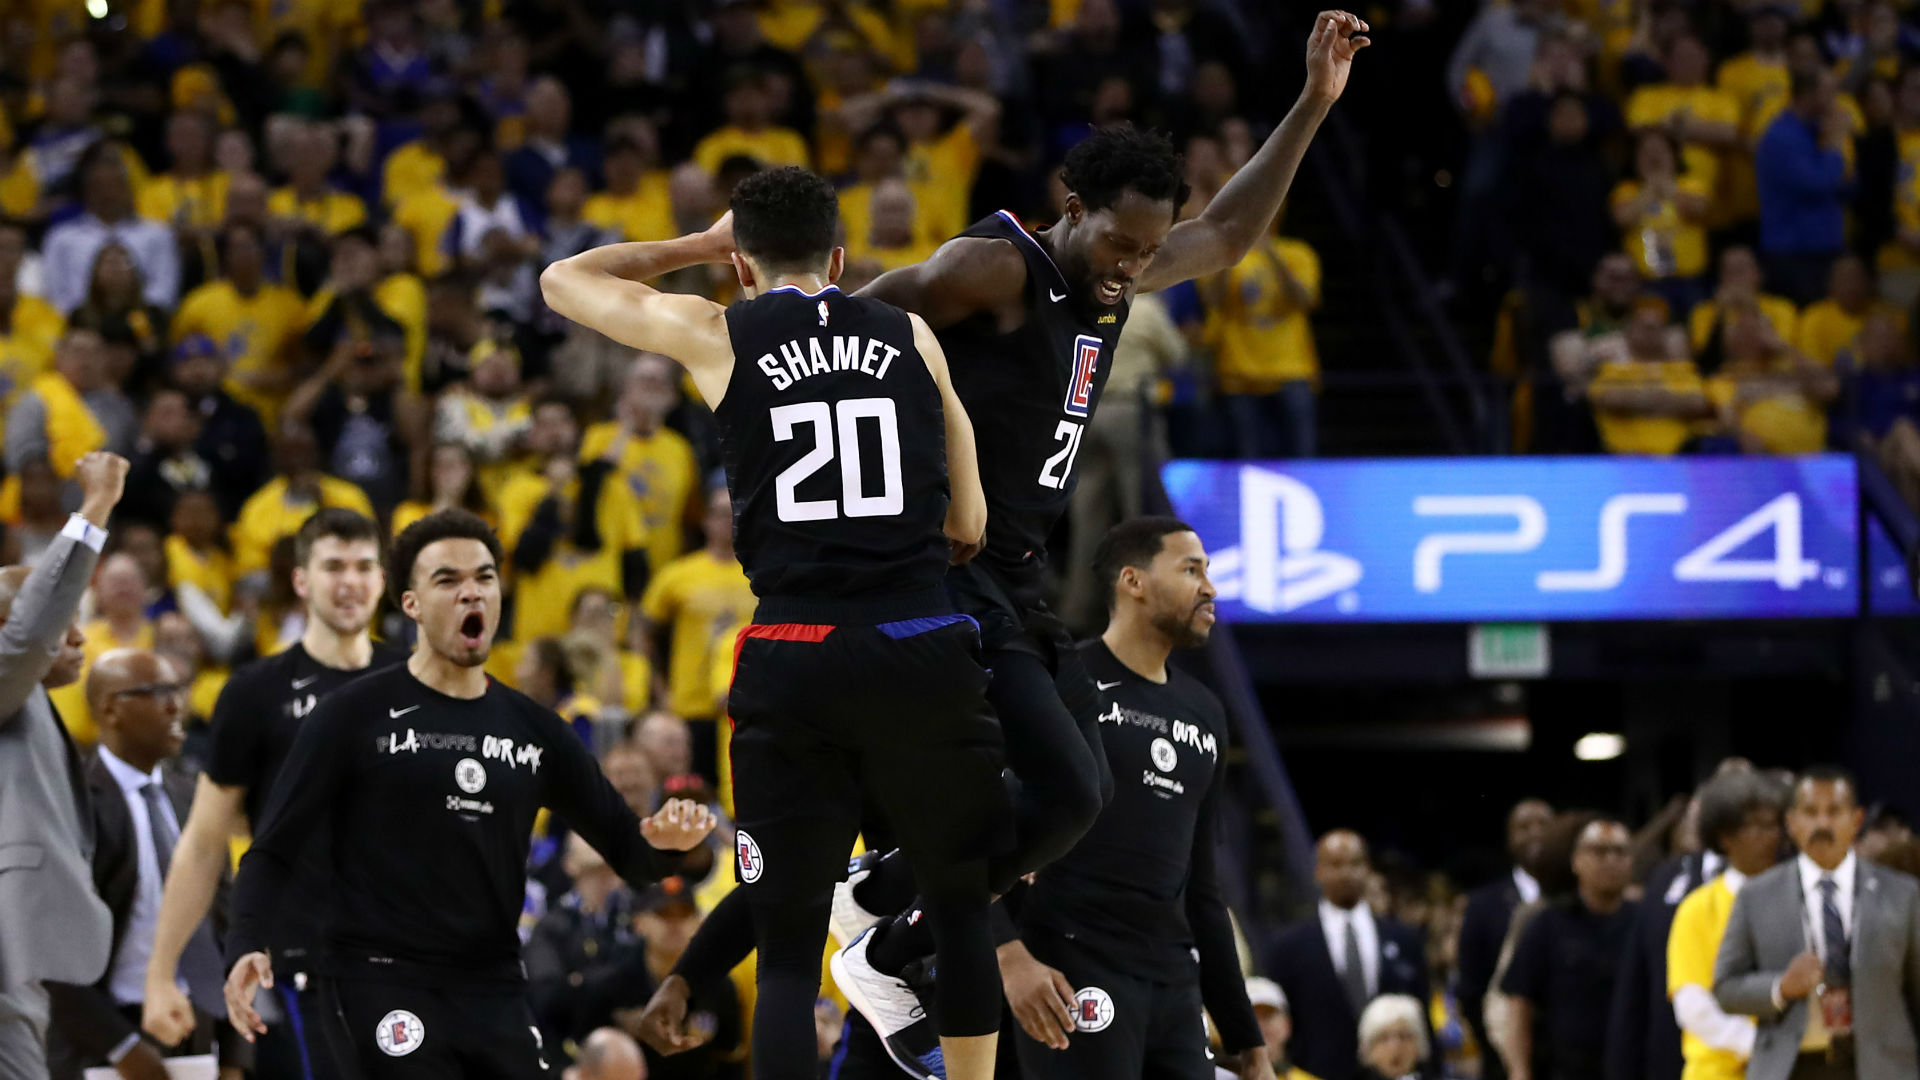 NBA Playoffs 2019: Scores and highlights from Nets vs. Sixers, Clippers vs. Warriors ...1920 x 1080